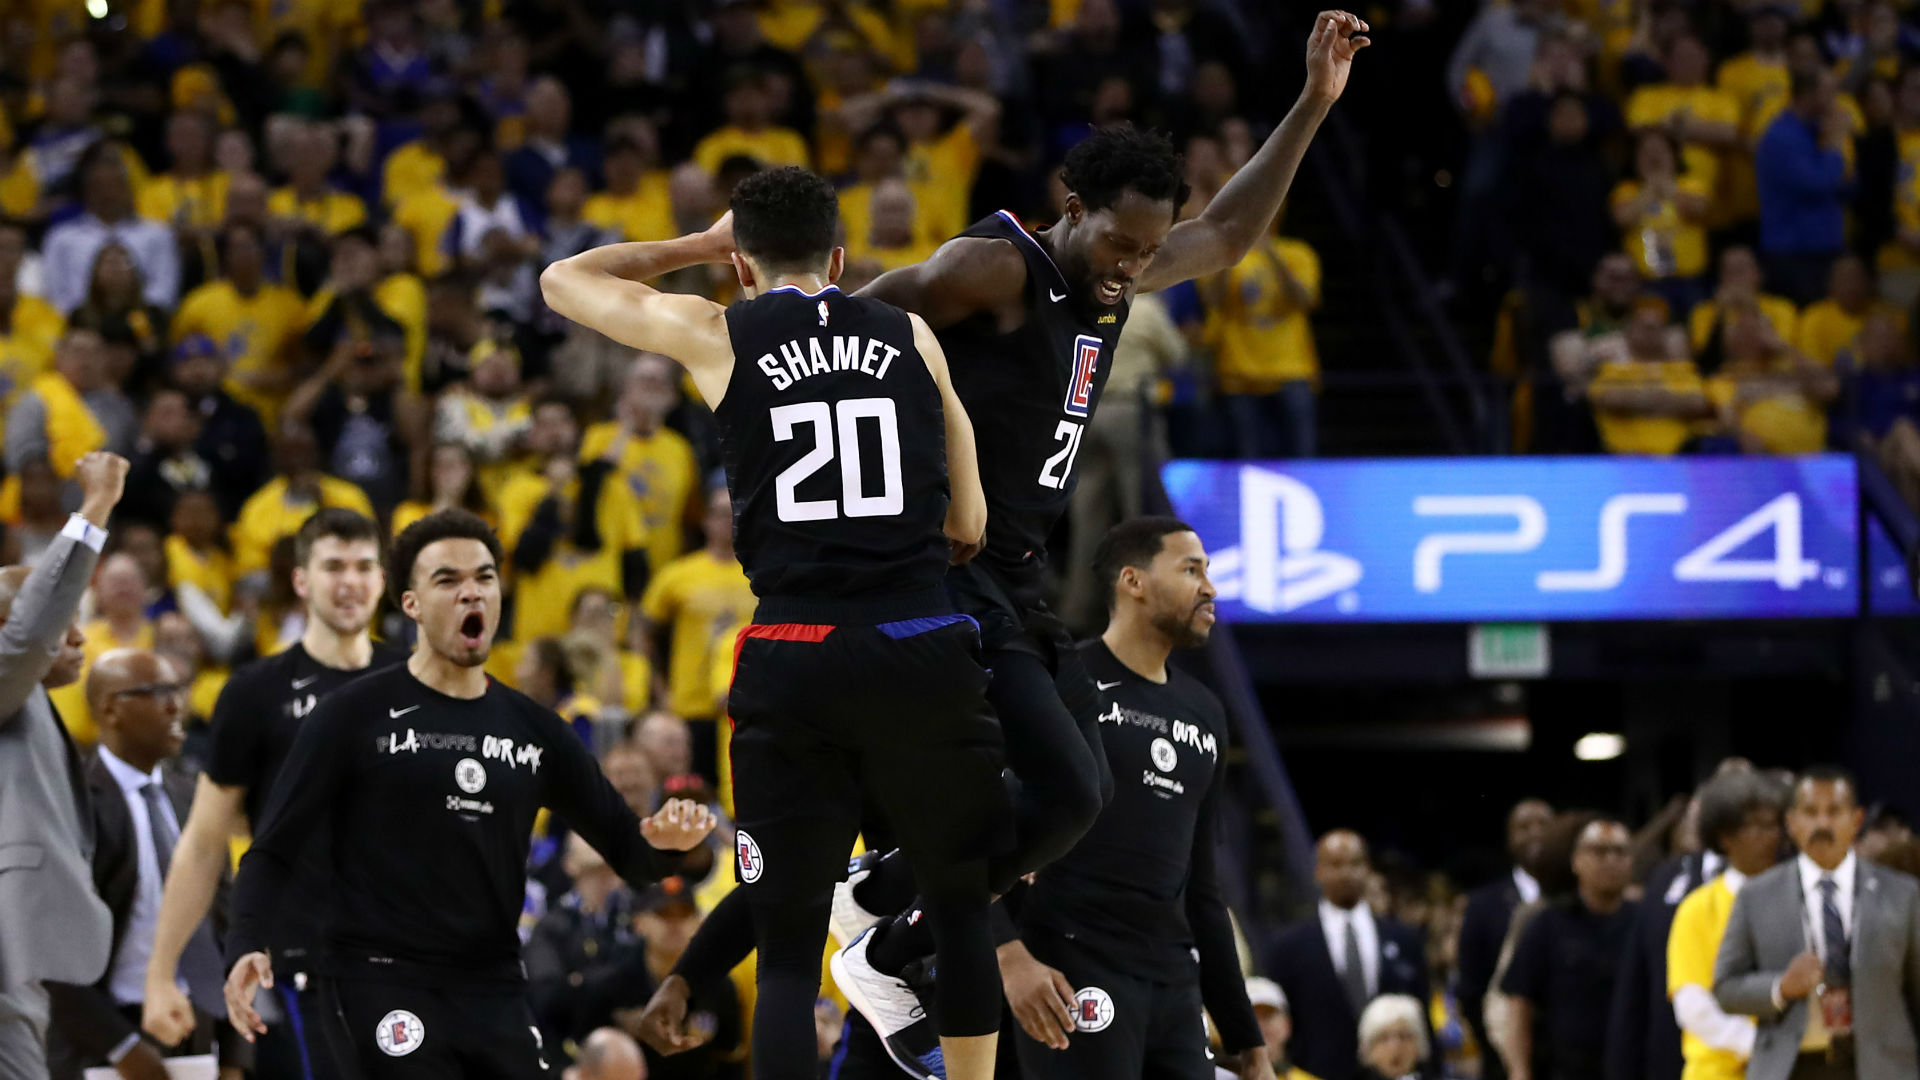 NBA Playoffs 2019: Scores and highlights from Nets vs. Sixers, Clippers vs. Warriors ...1920 x 1080